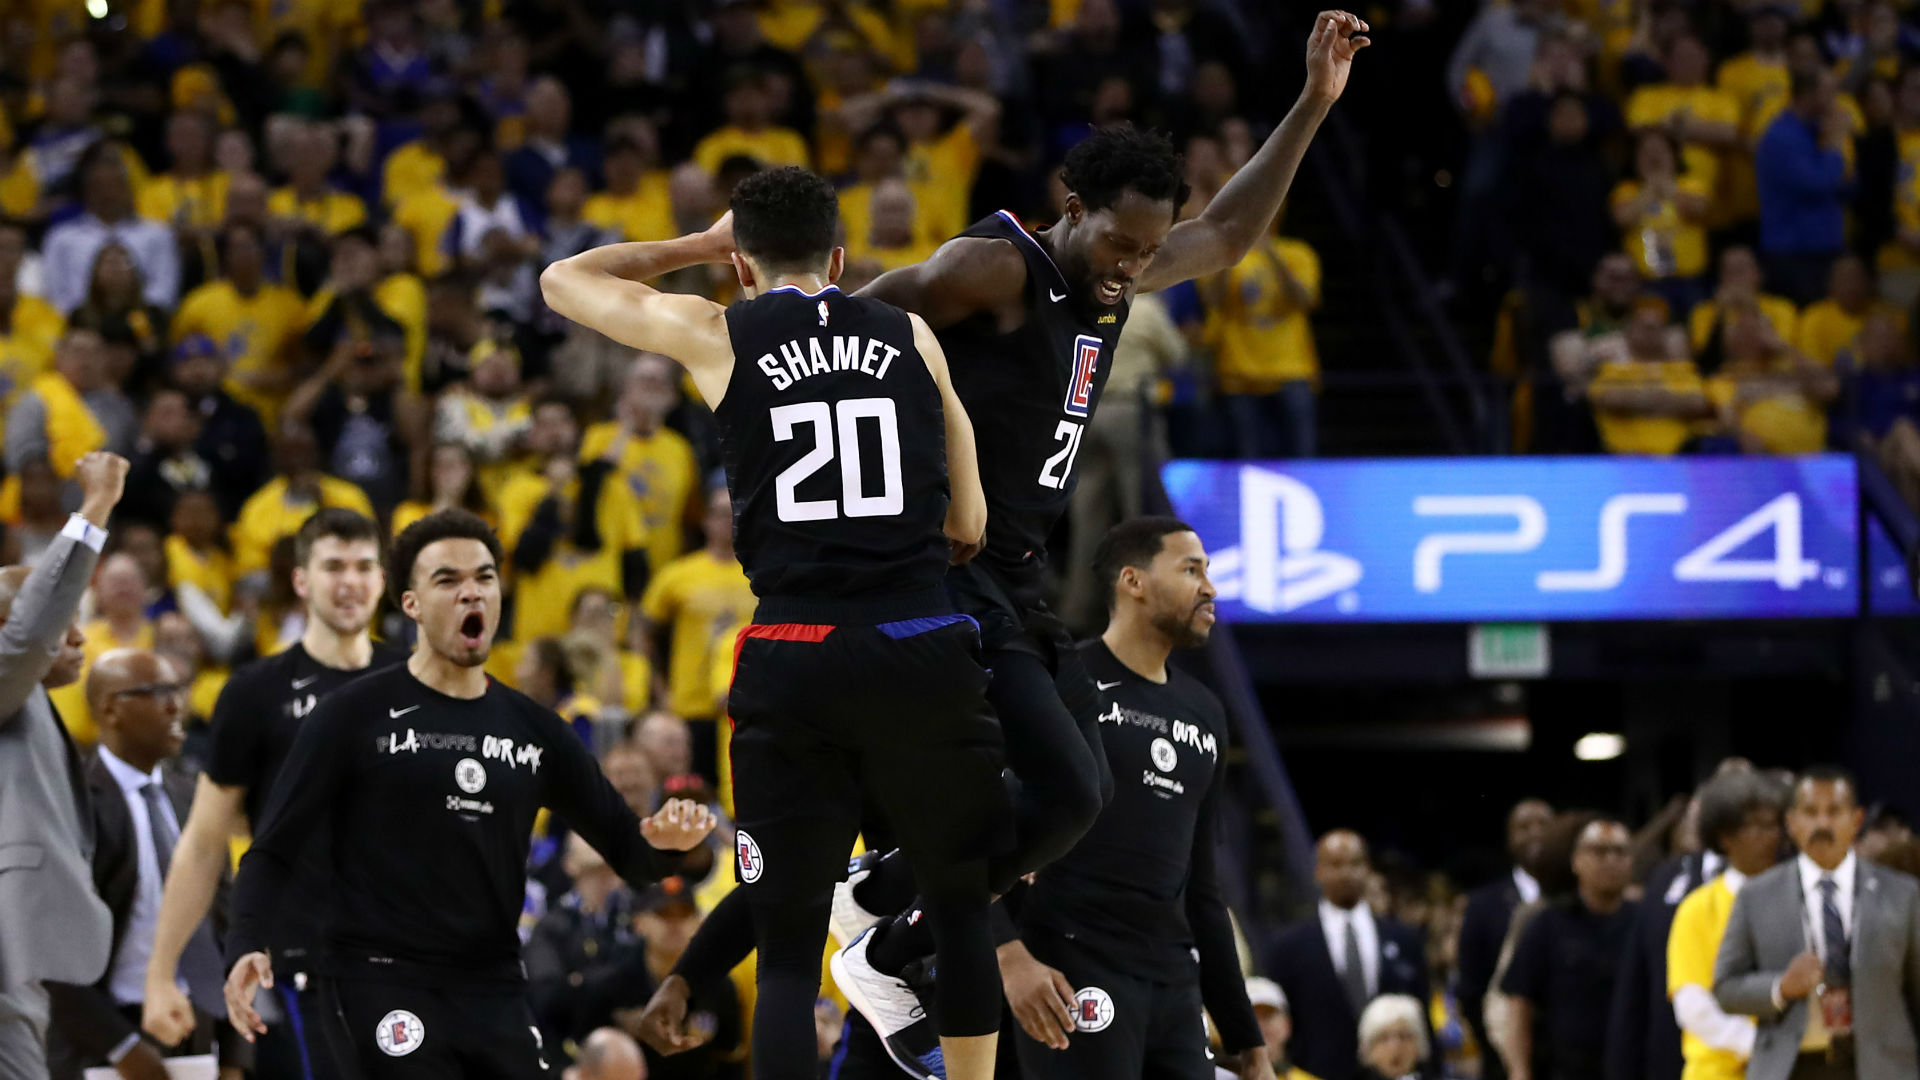 NBA Playoffs 2019: Scores and highlights from Nets vs. Sixers, Clippers vs. Warriors ...1920 x 1080